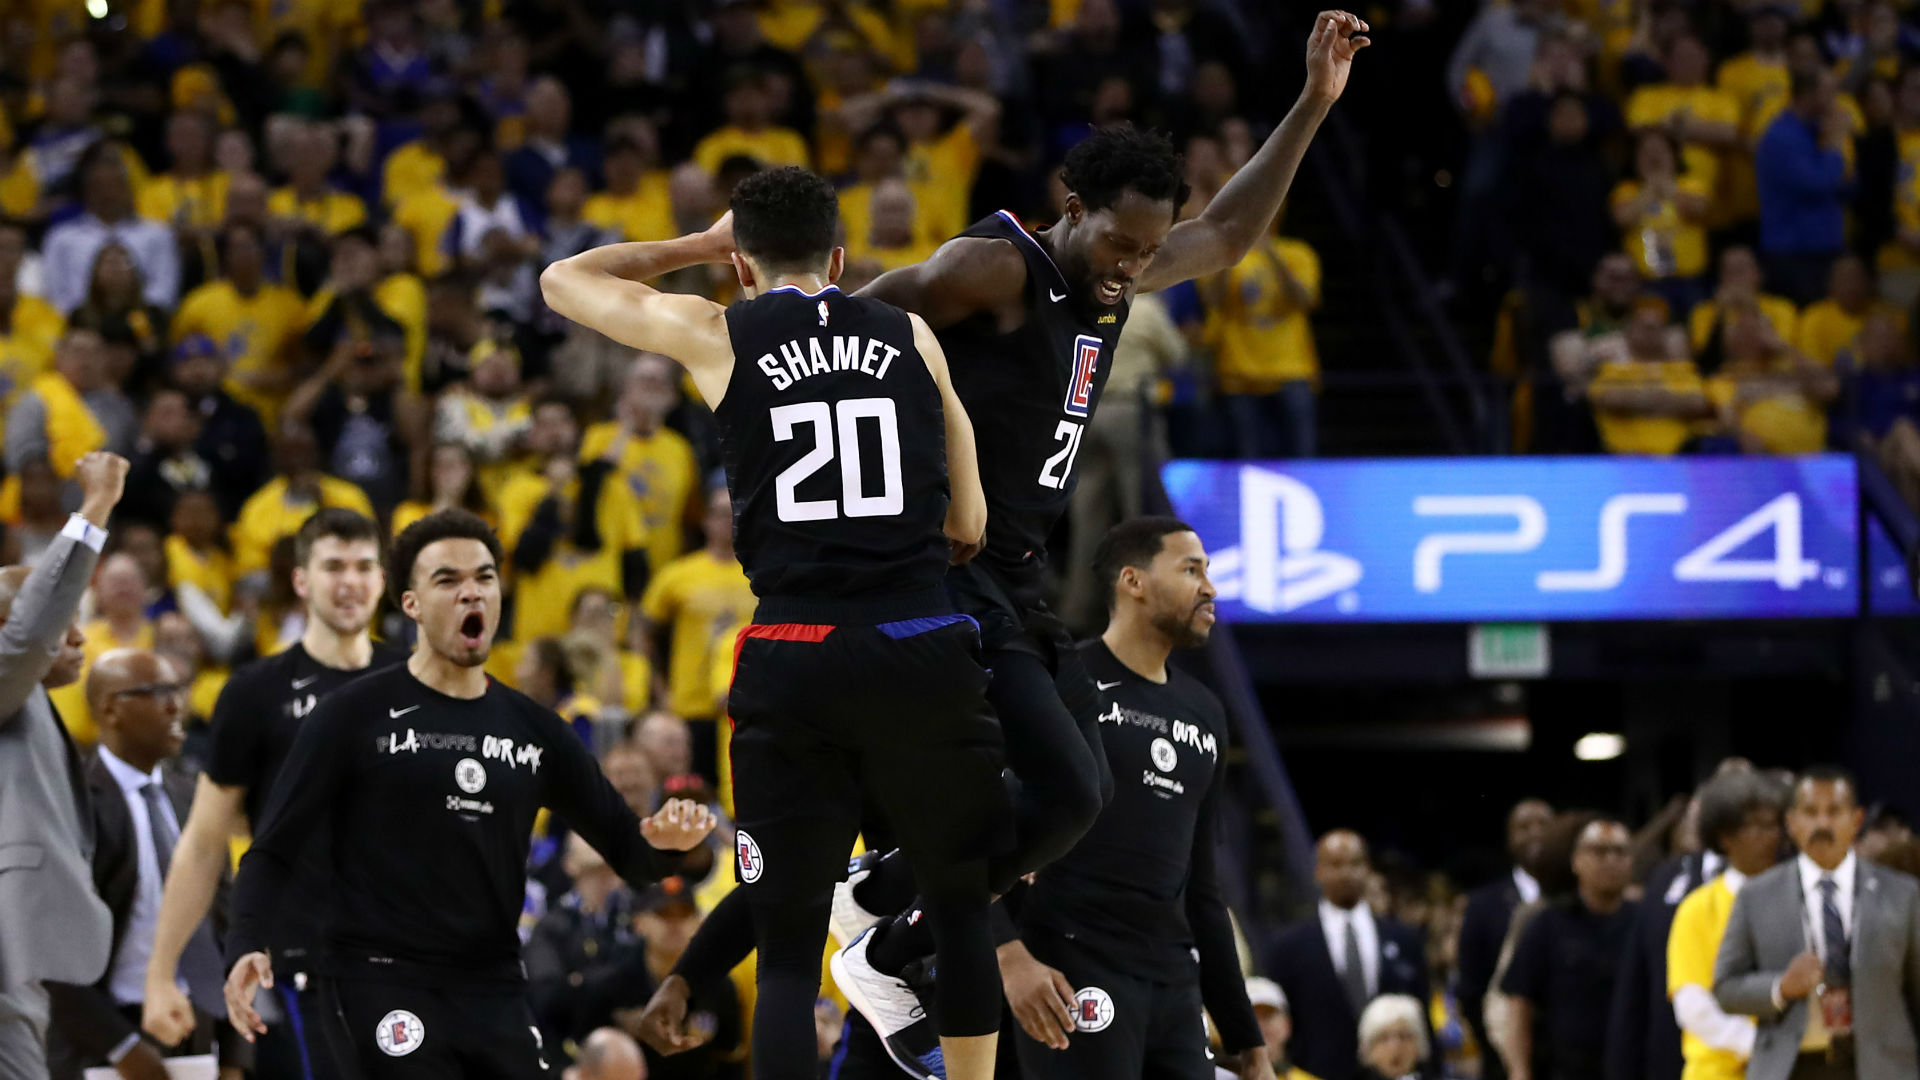 NBA Playoffs 2019: Scores and highlights from Nets vs. Sixers, Clippers vs. Warriors ...1920 x 1080